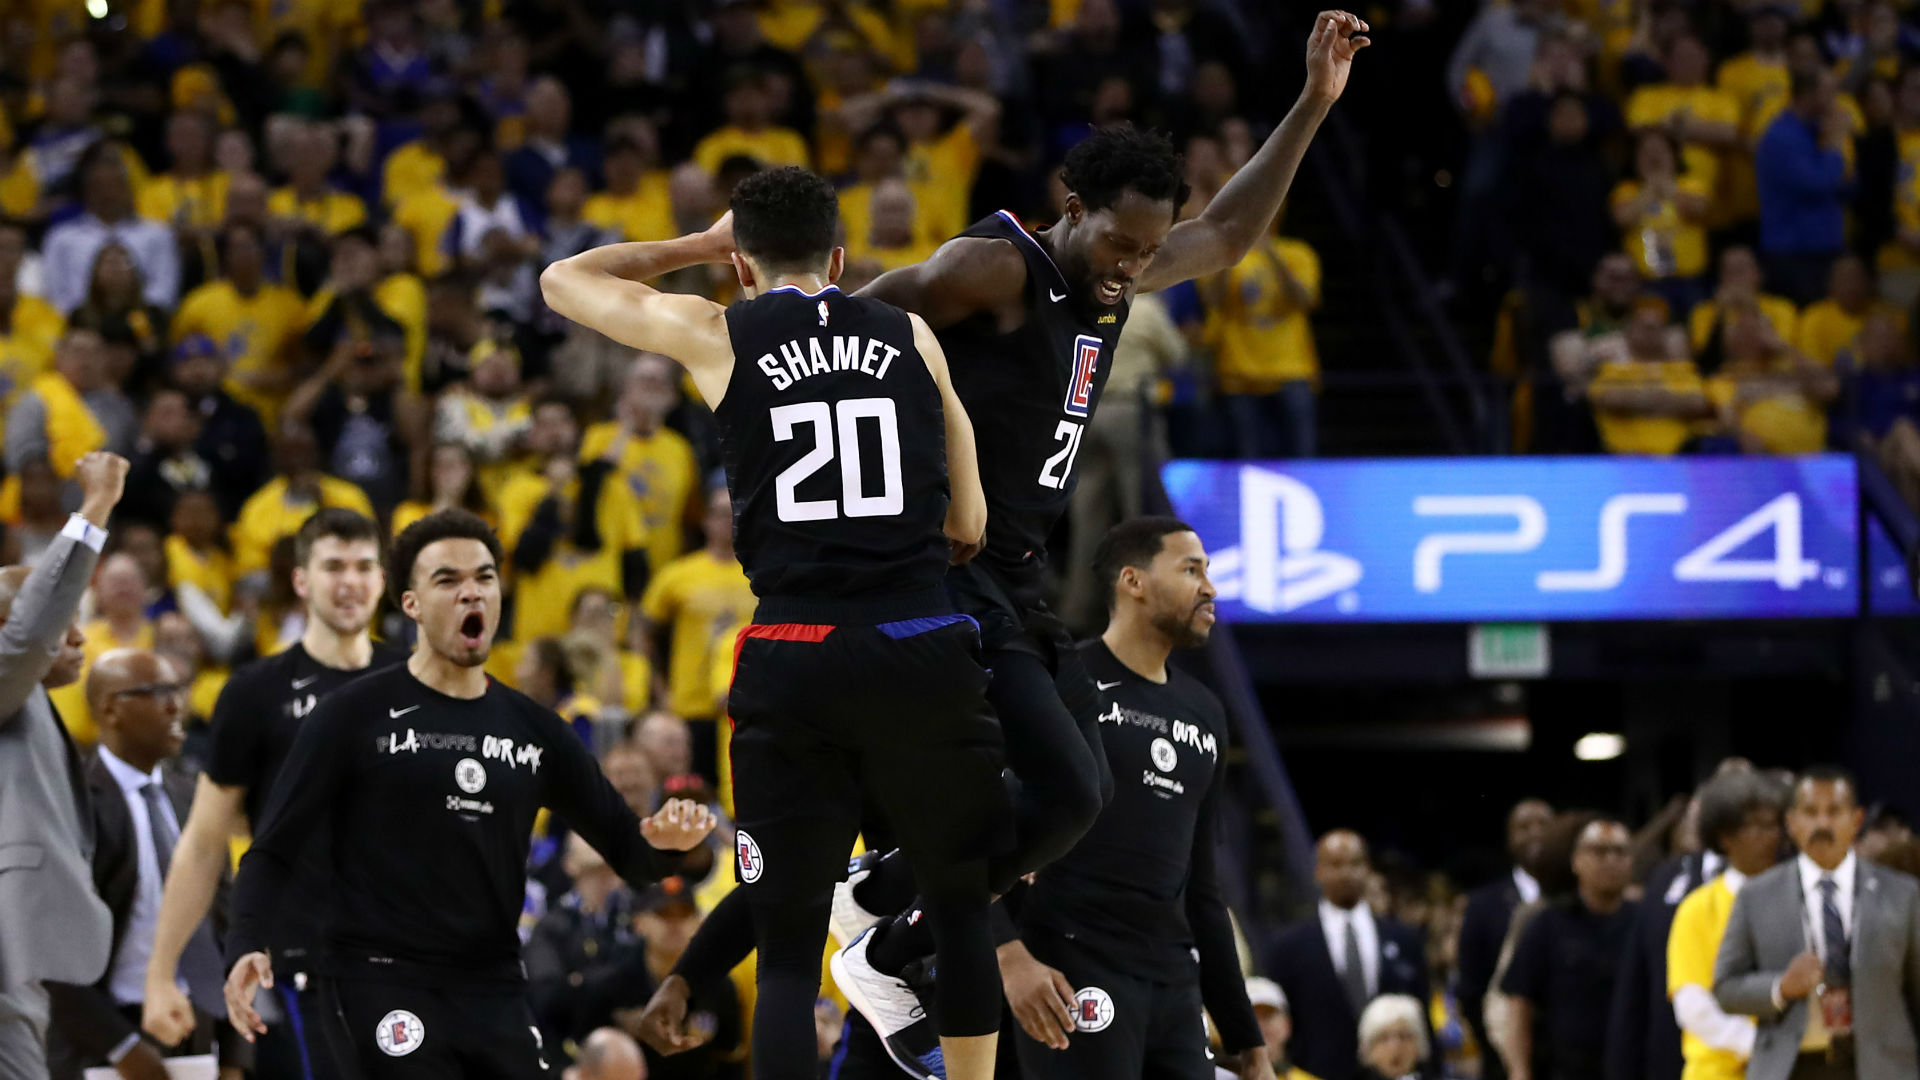 NBA Playoffs 2019: Scores and highlights from Nets vs. Sixers, Clippers vs. Warriors ...1920 x 1080